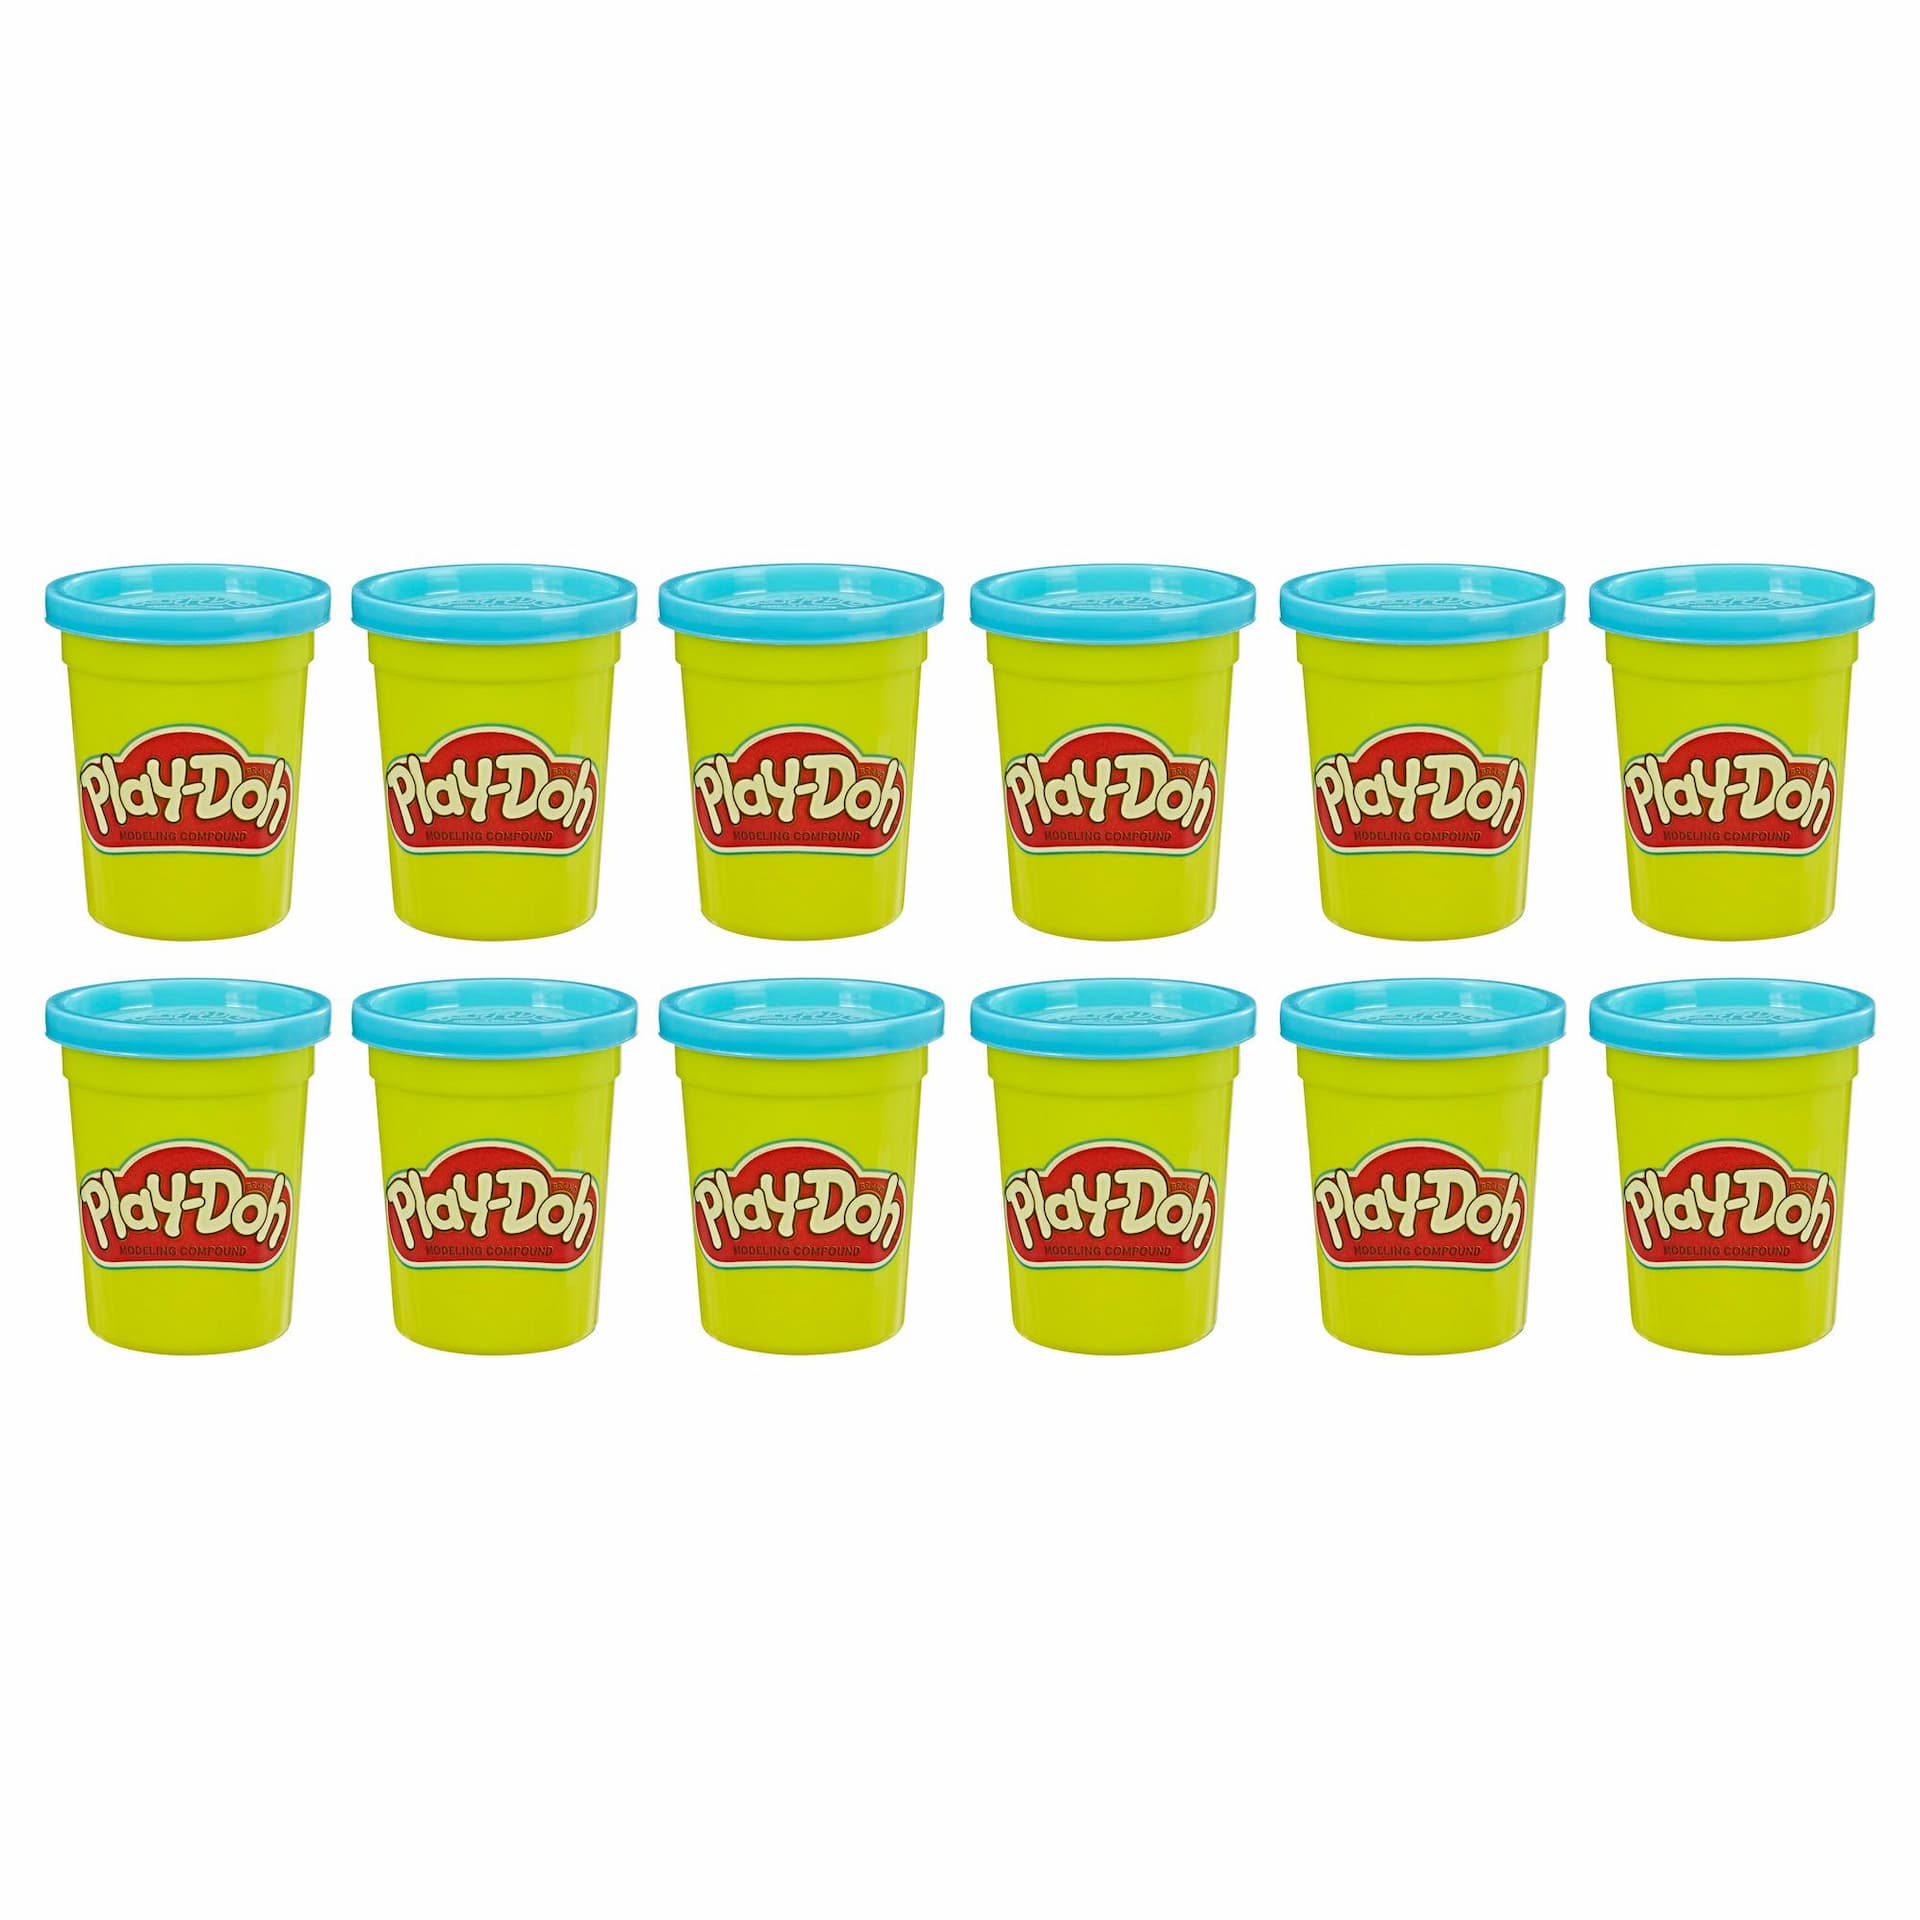 Play-Doh Bulk 12-Pack of Blue Non-Toxic Modeling Compound, 4-Ounce Cans